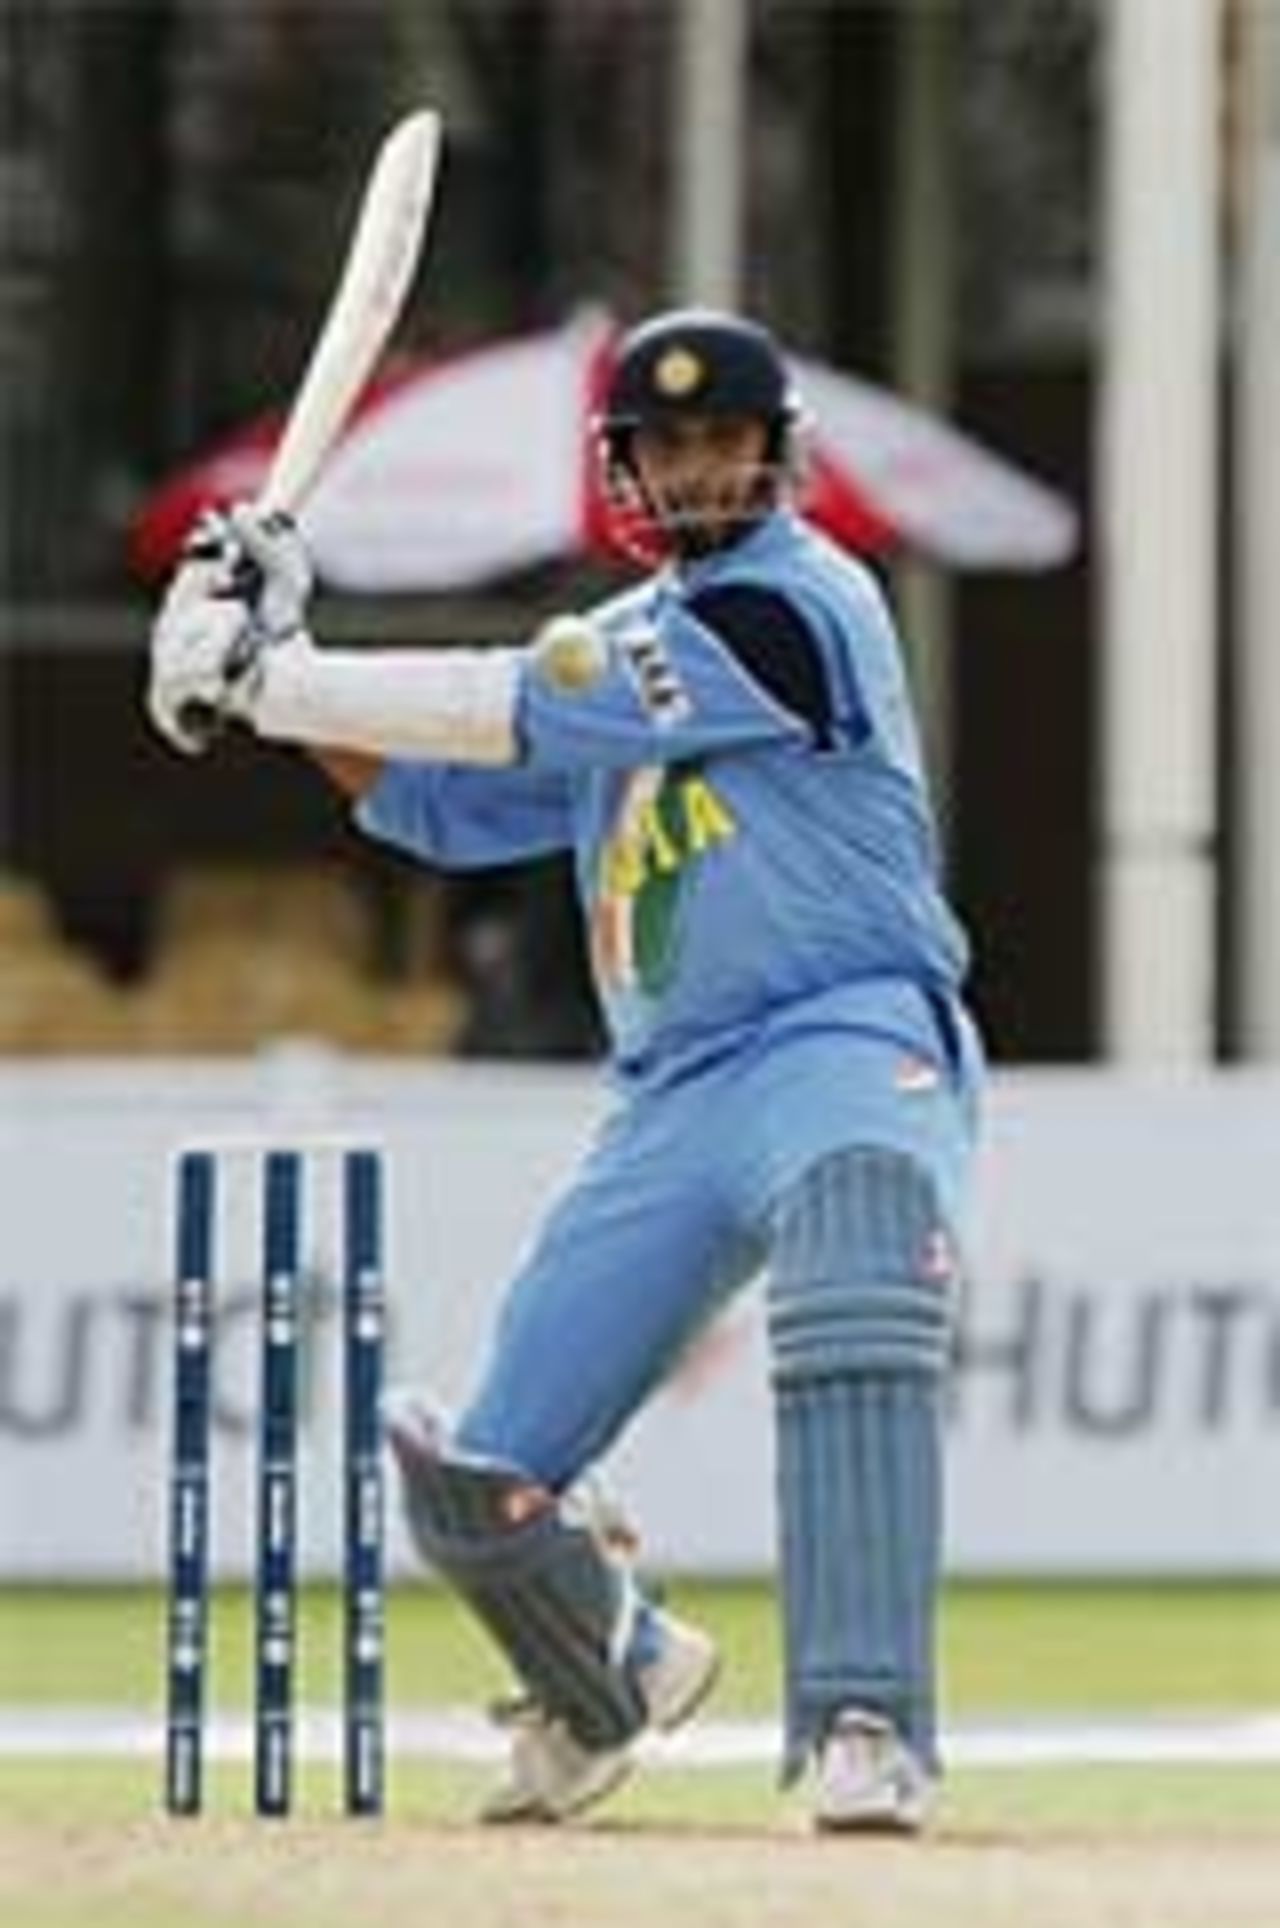 Rahul Dravid about to play a hook shot, Pakistan v India, Champions Trophy, September 19